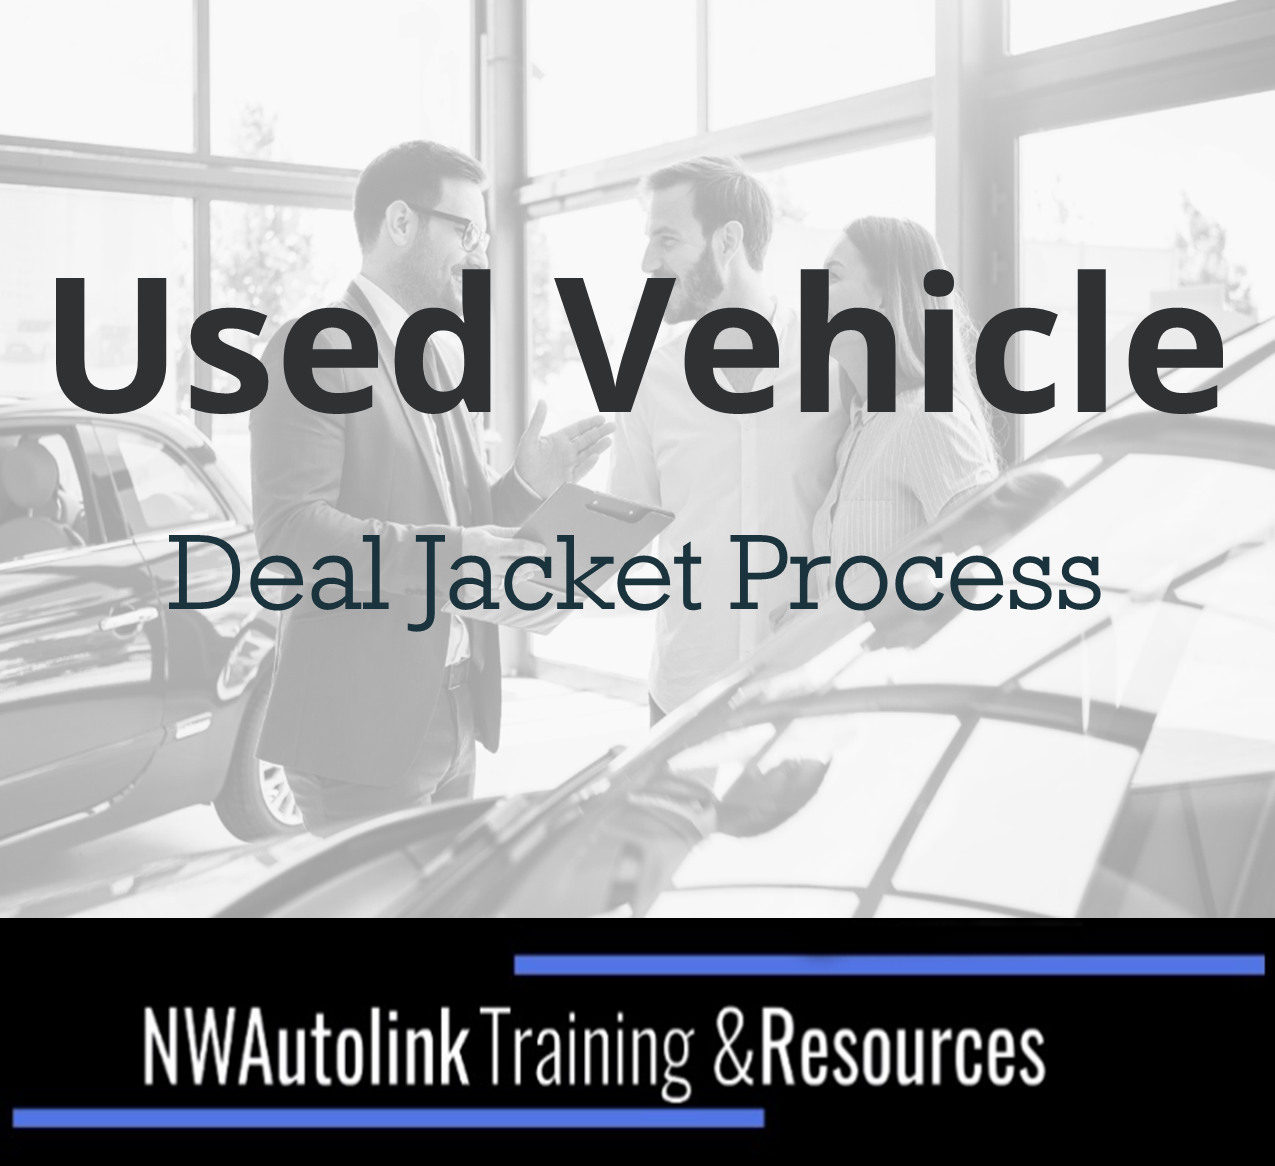 Used Vehicle Deal Jackets Process